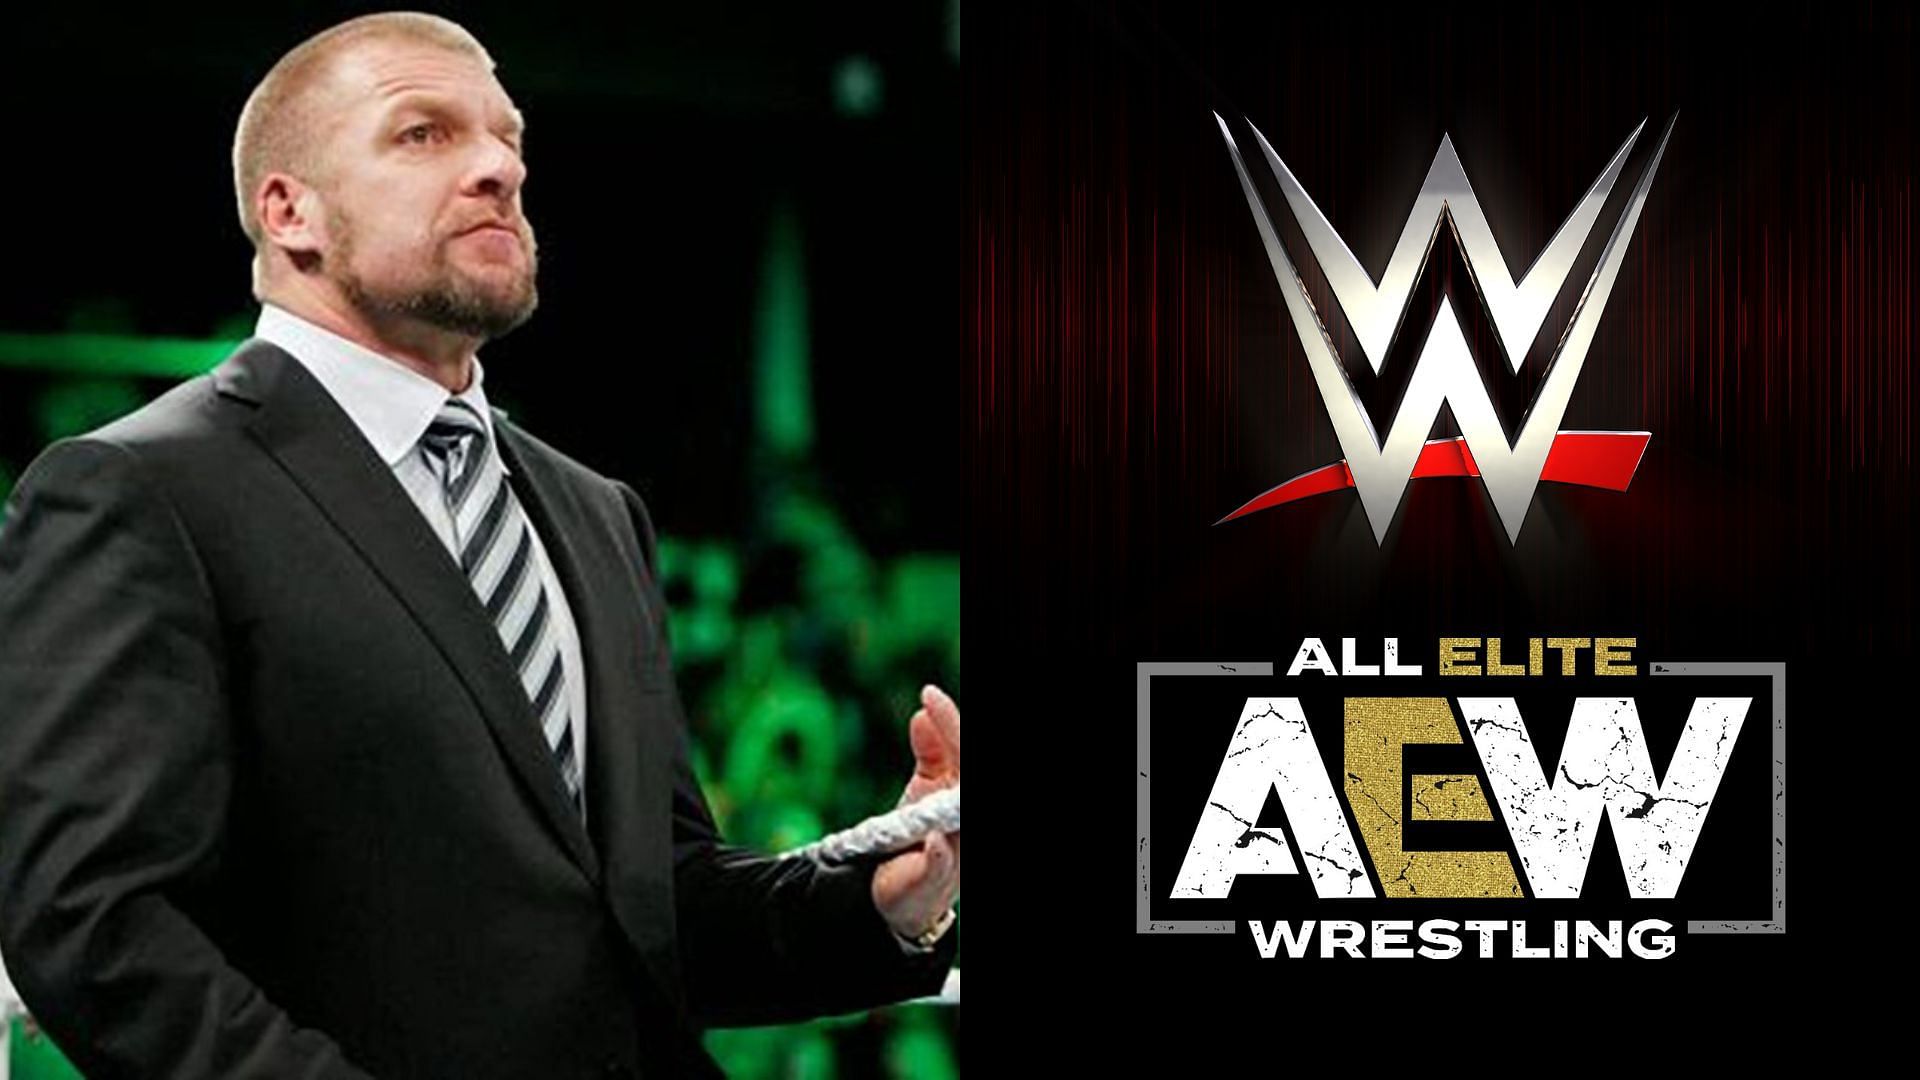 Triple H (left), AEW and WWE logos (right)